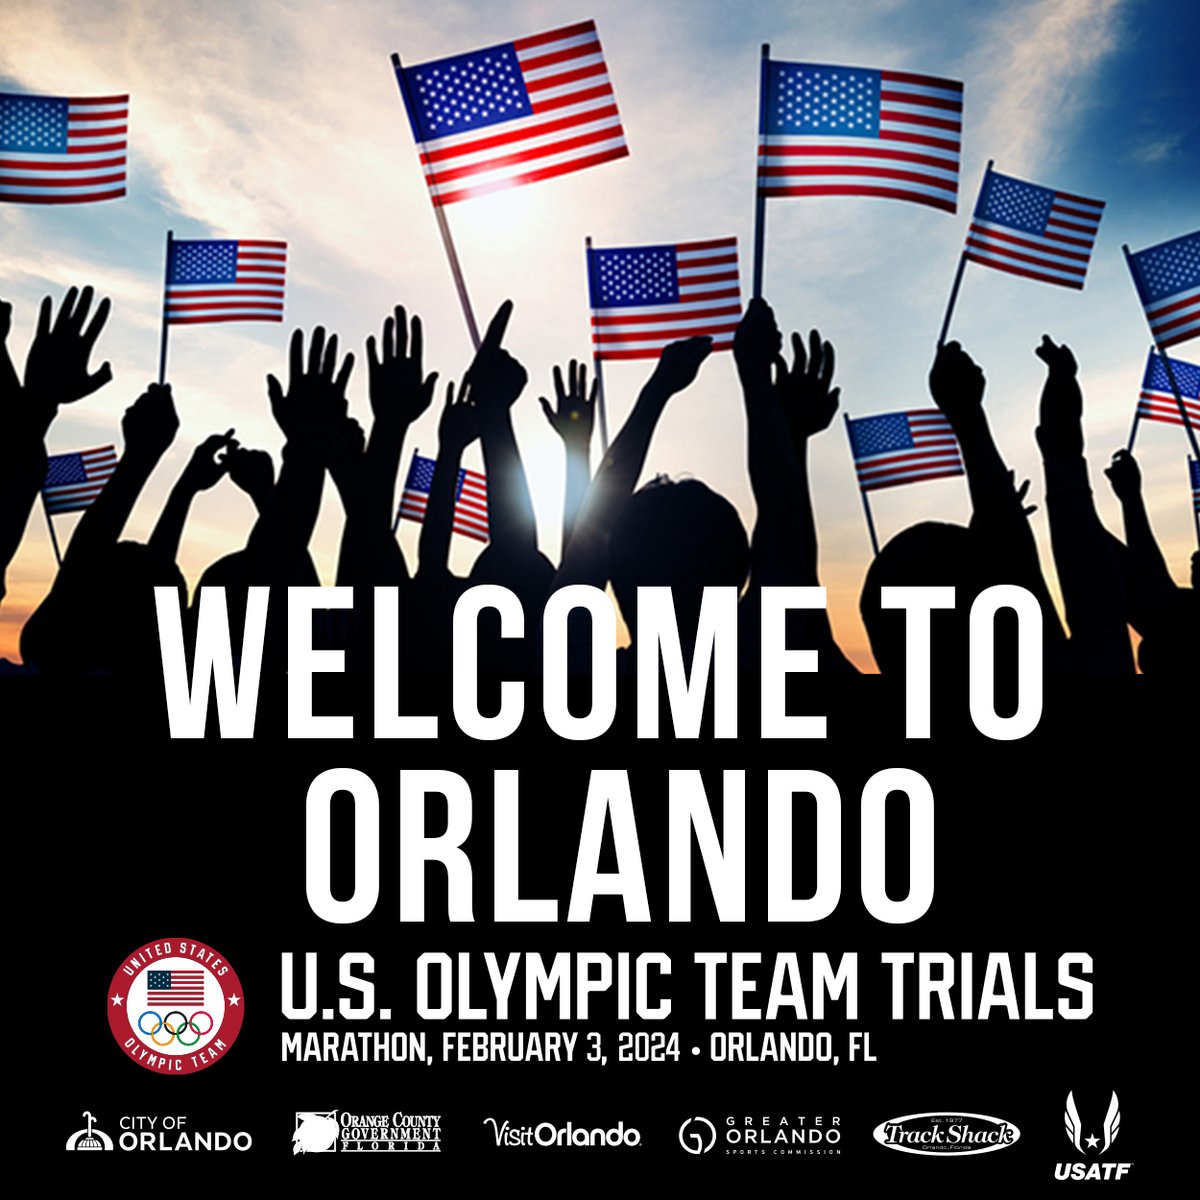 To the 361 world-class long-distance runners traveling to downtown Orlando this weekend to run in the US Olympic Team Trials – Marathon, welcome to the City Beautiful.  We can’t wait to cheer you on as you compete to represent the US at the 2024 Paris Summer Olympics!